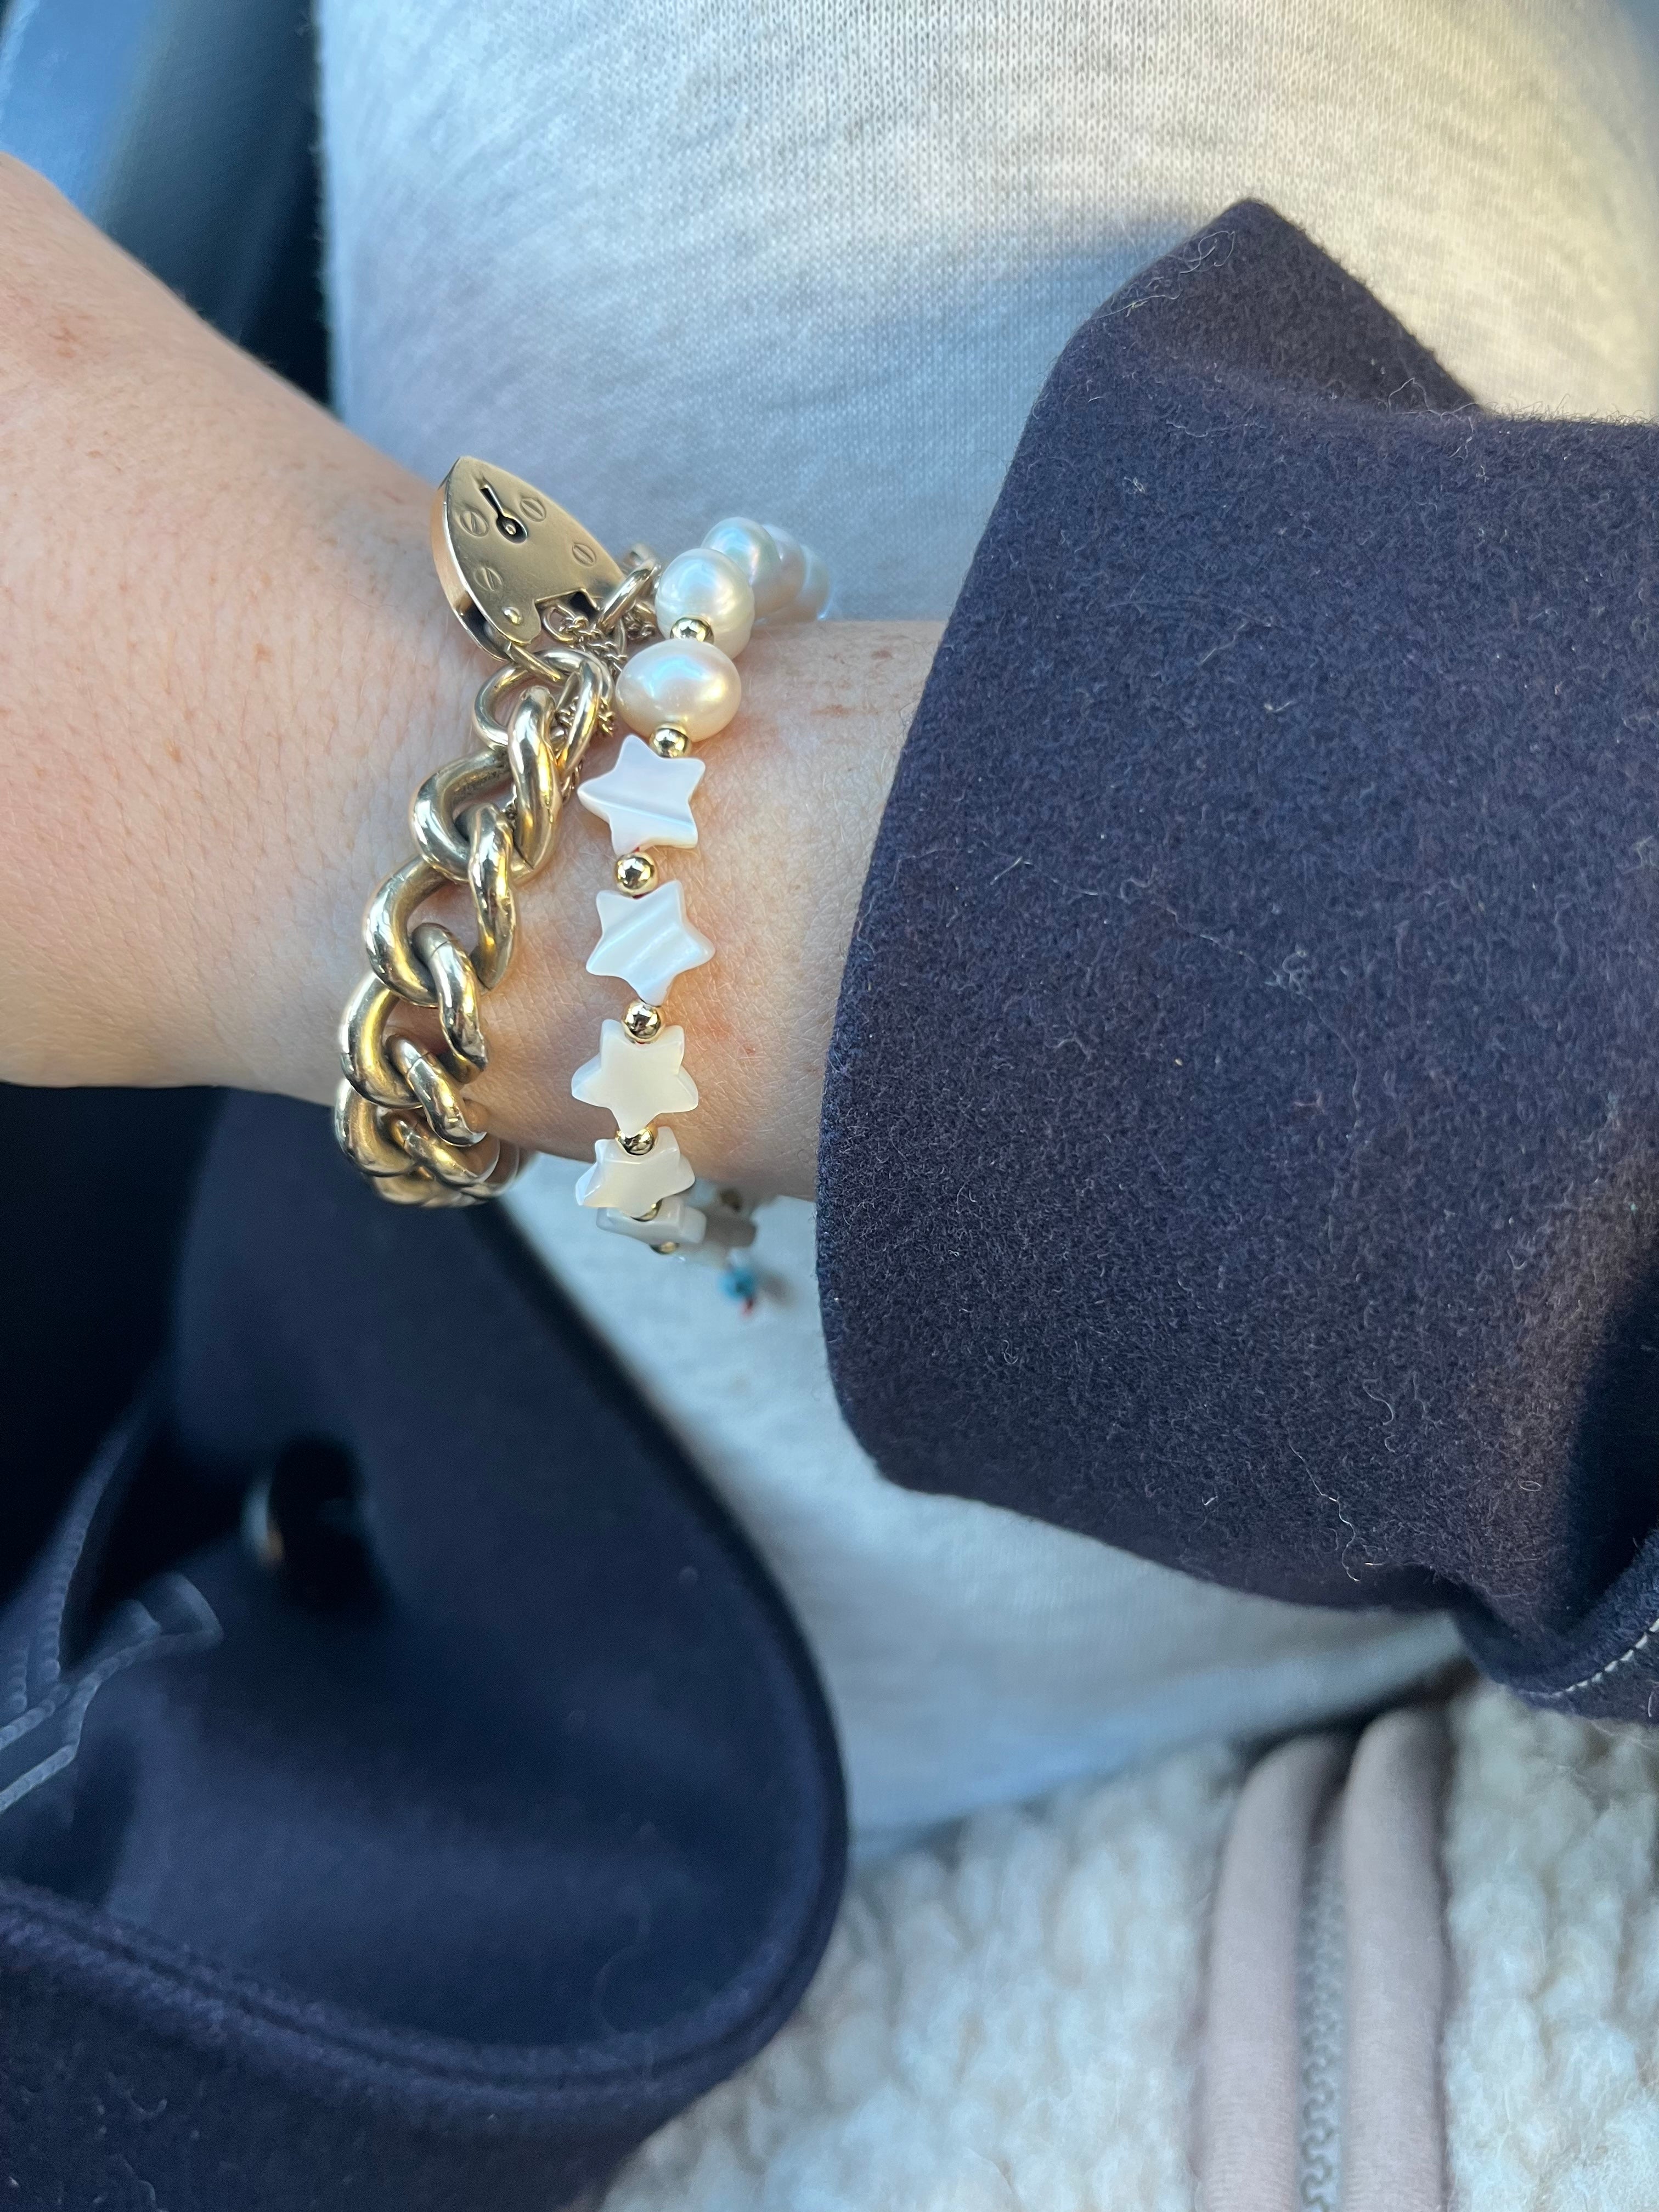 Star and pearl bracelet